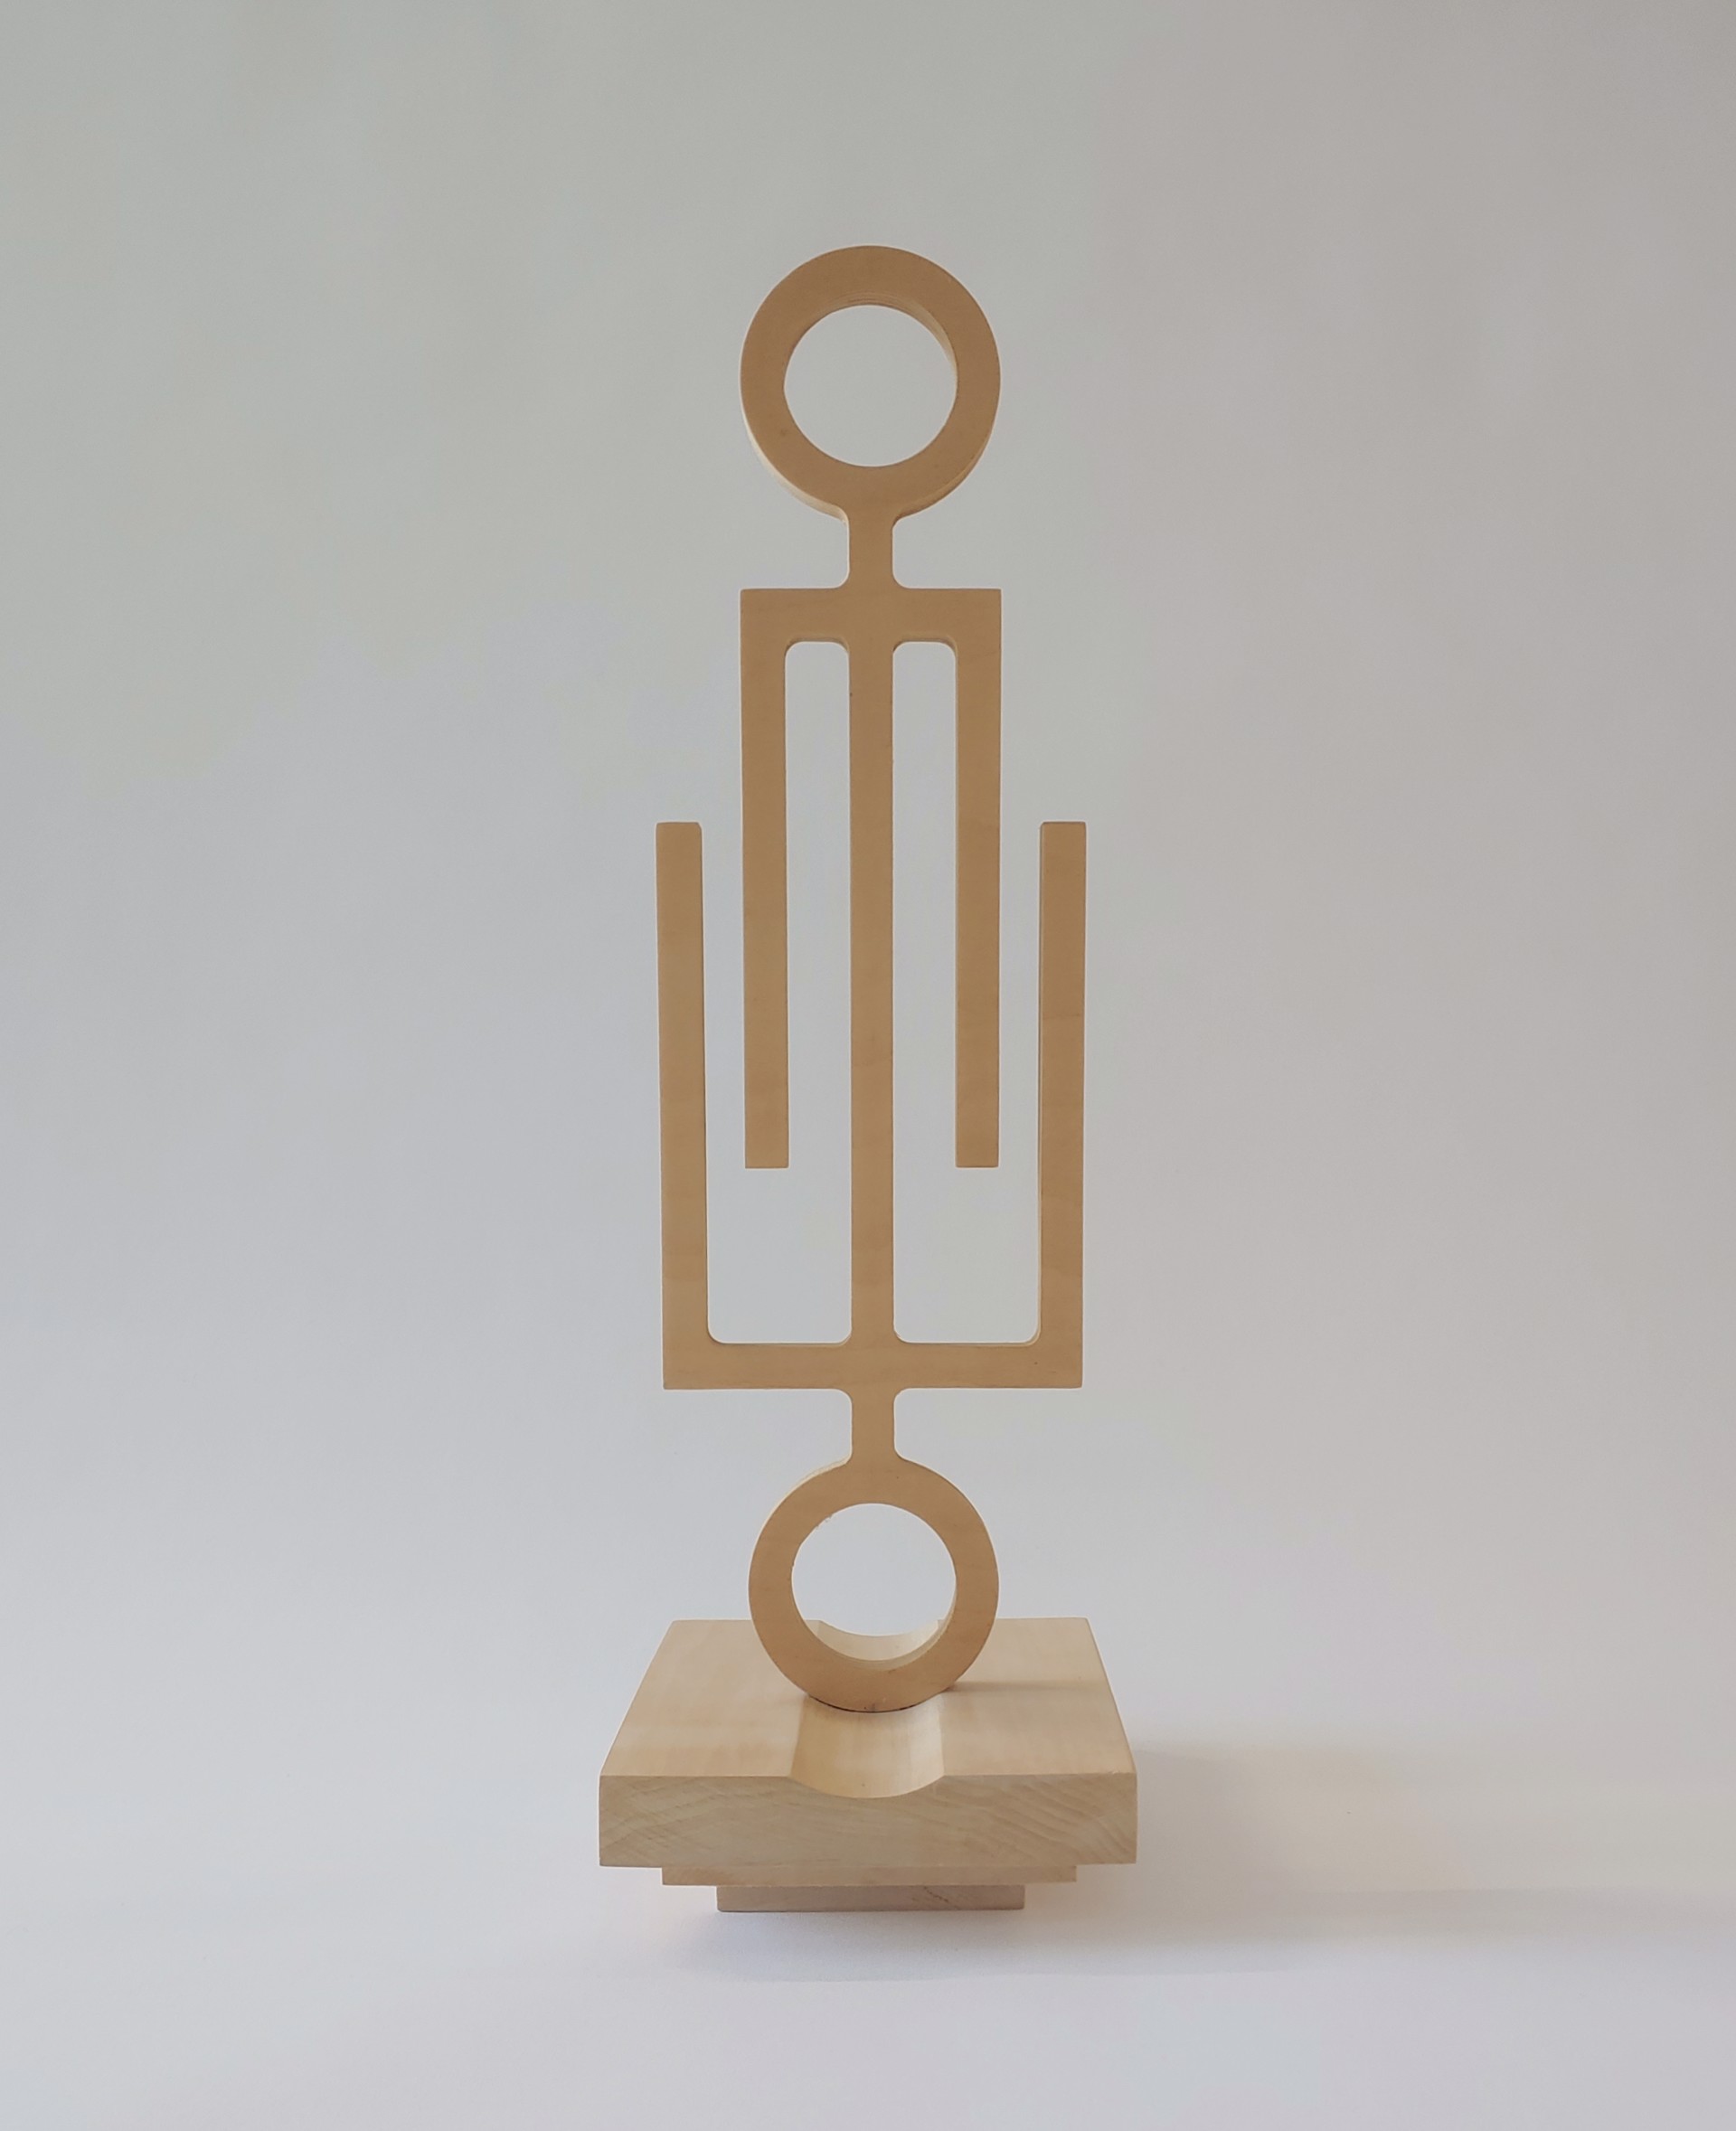 Abstract Cutout - Wood Sculpture, unfinished by David Amdur